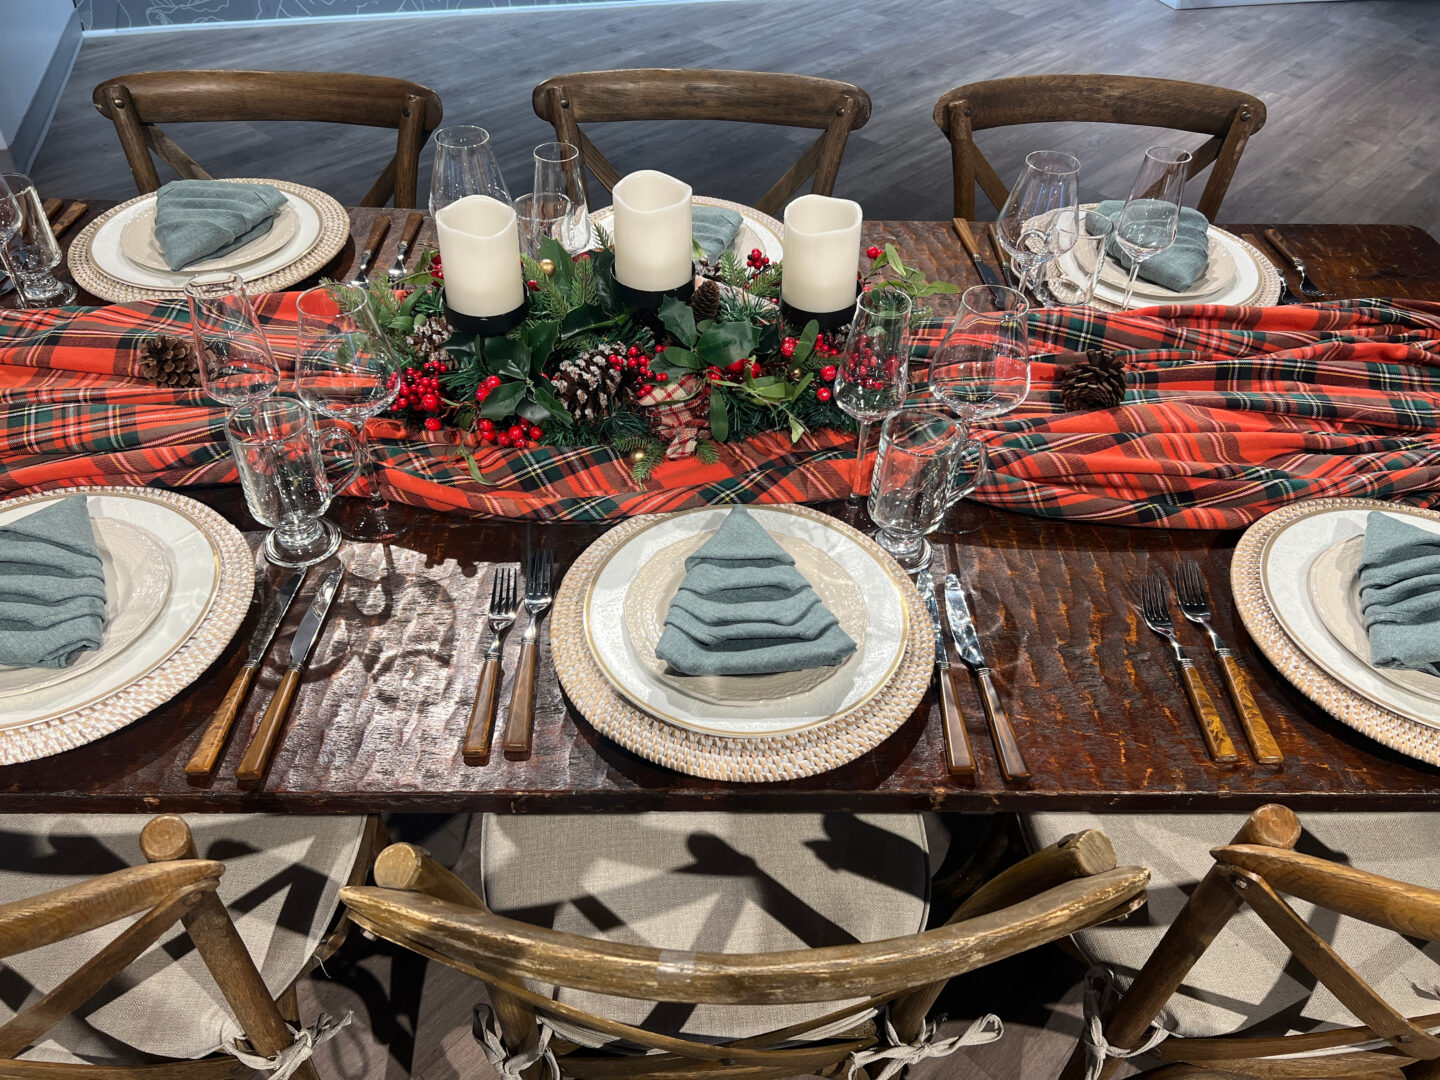 Rustic Holiday Table setting with Farm Table with plaid linen down center and six table settings.